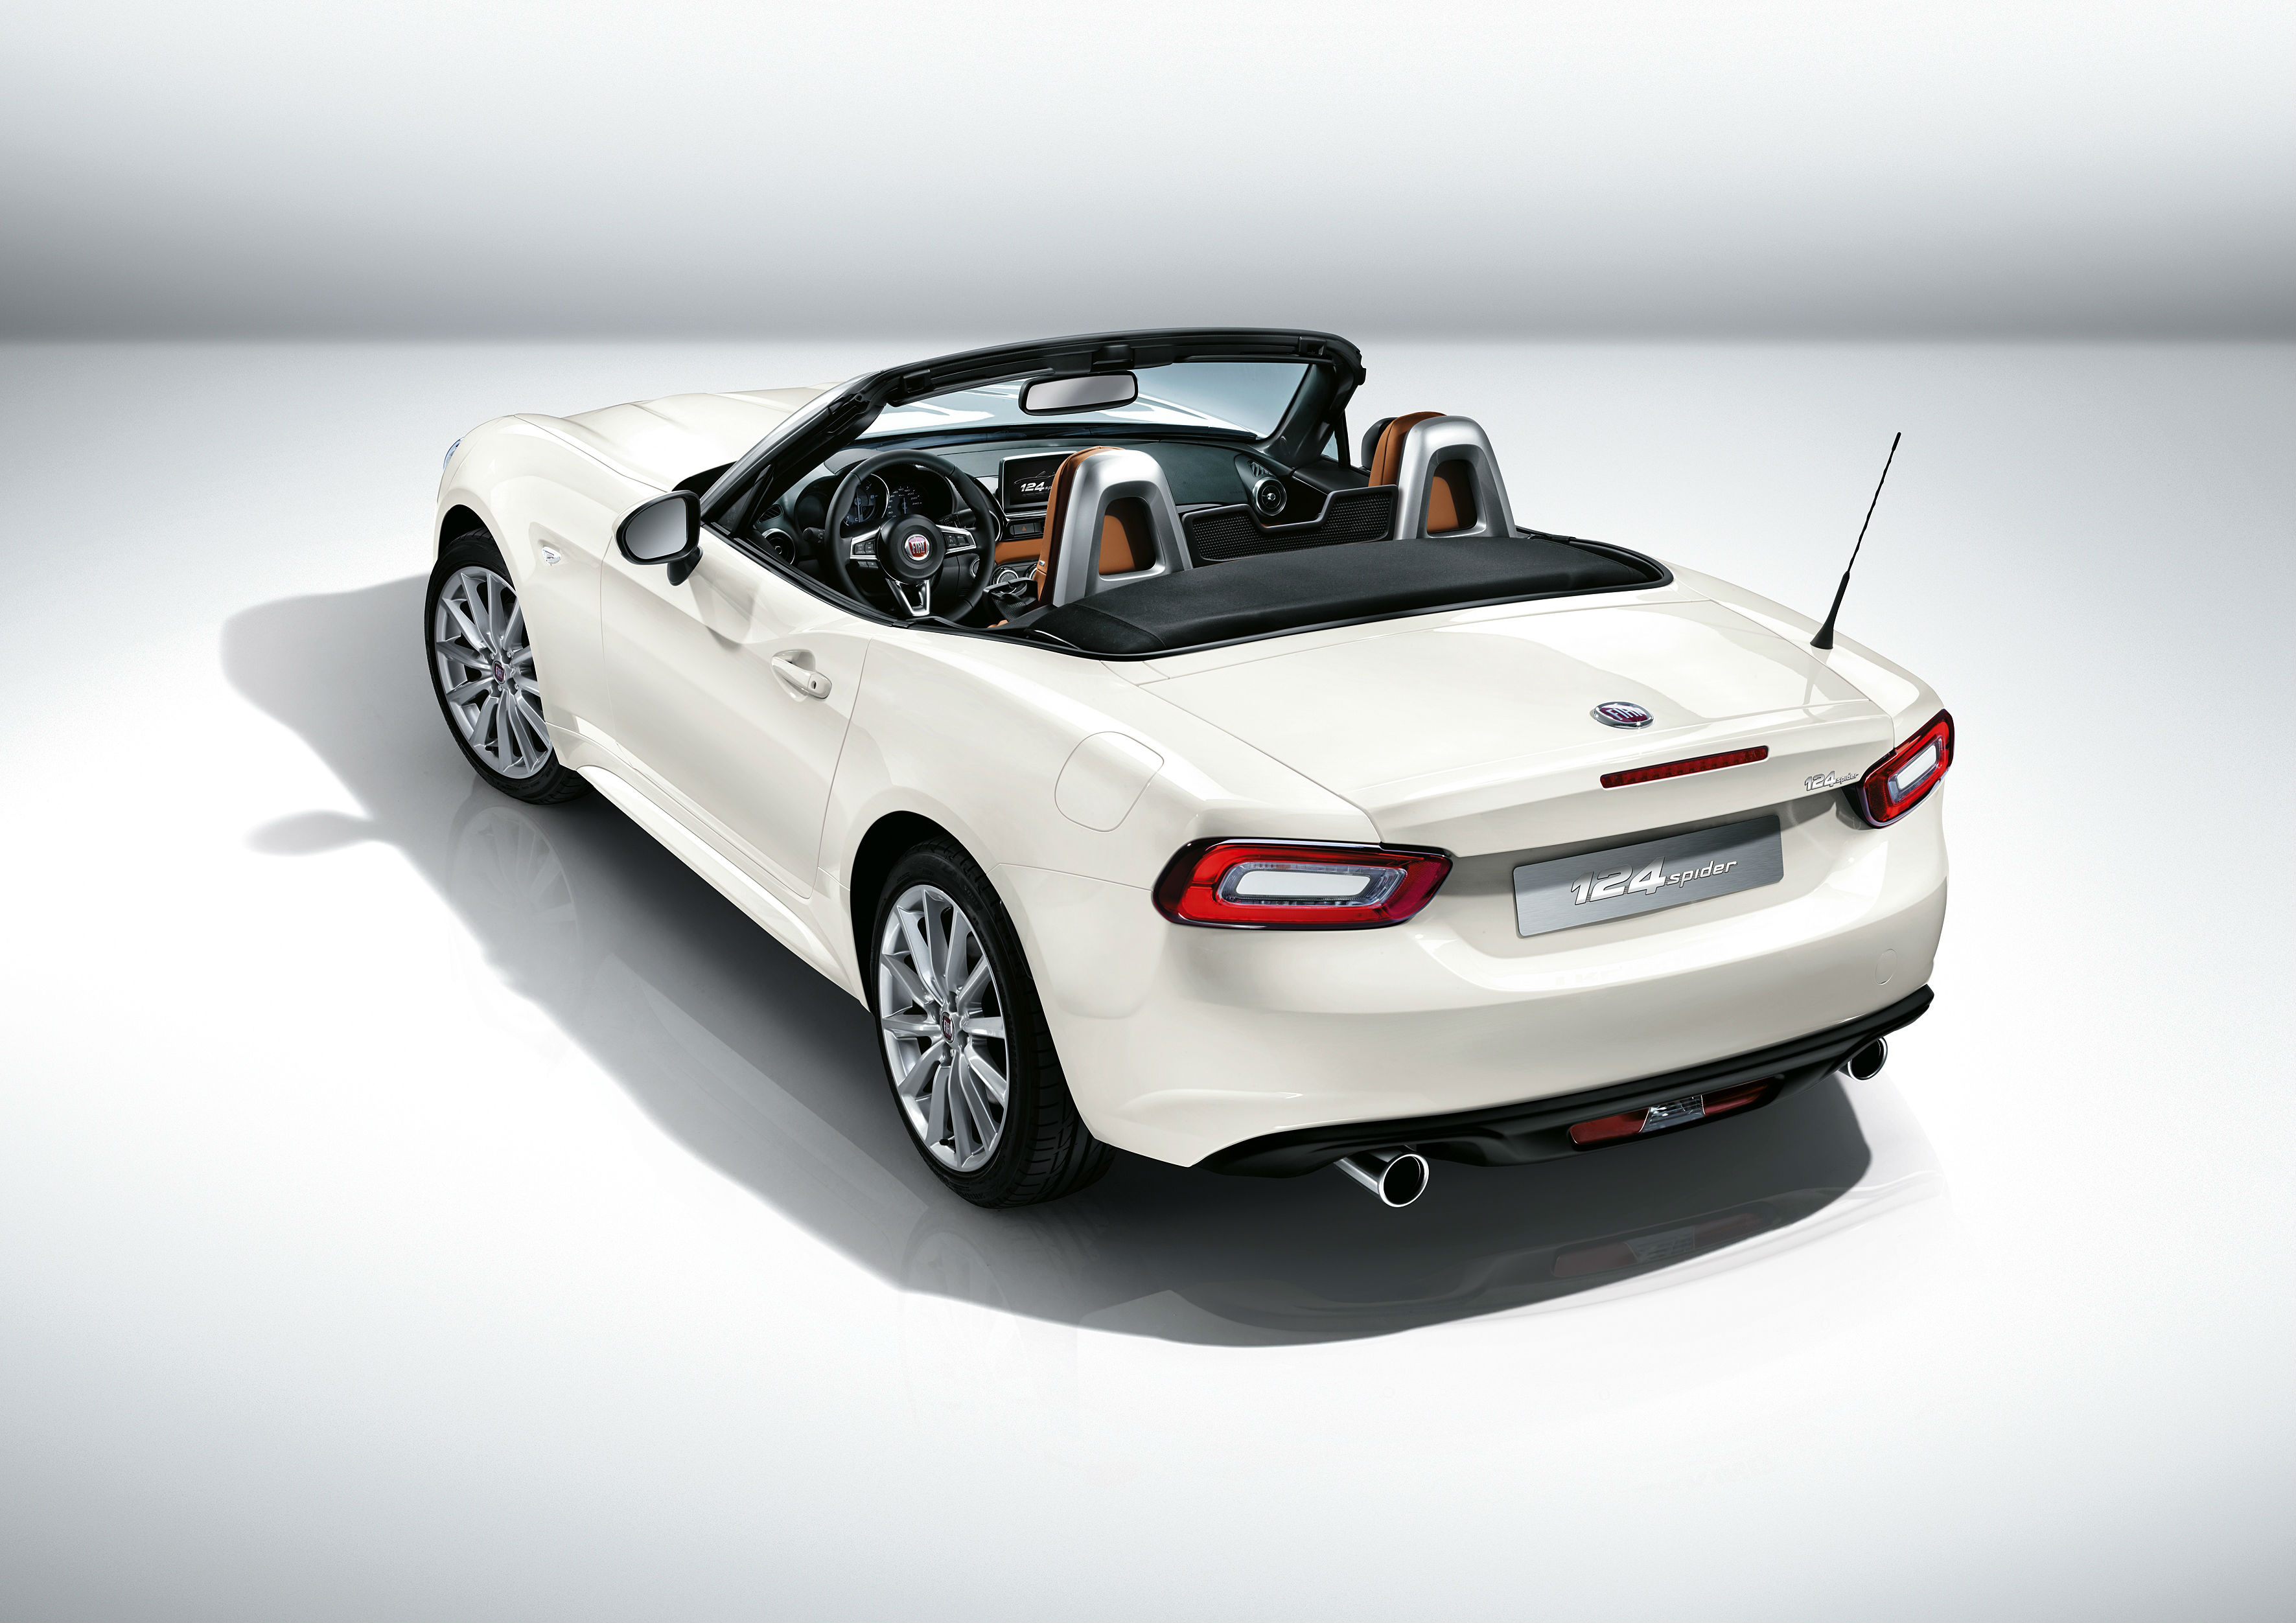 2015 Fiat 124 Spider goes on sale in the summer, 2016